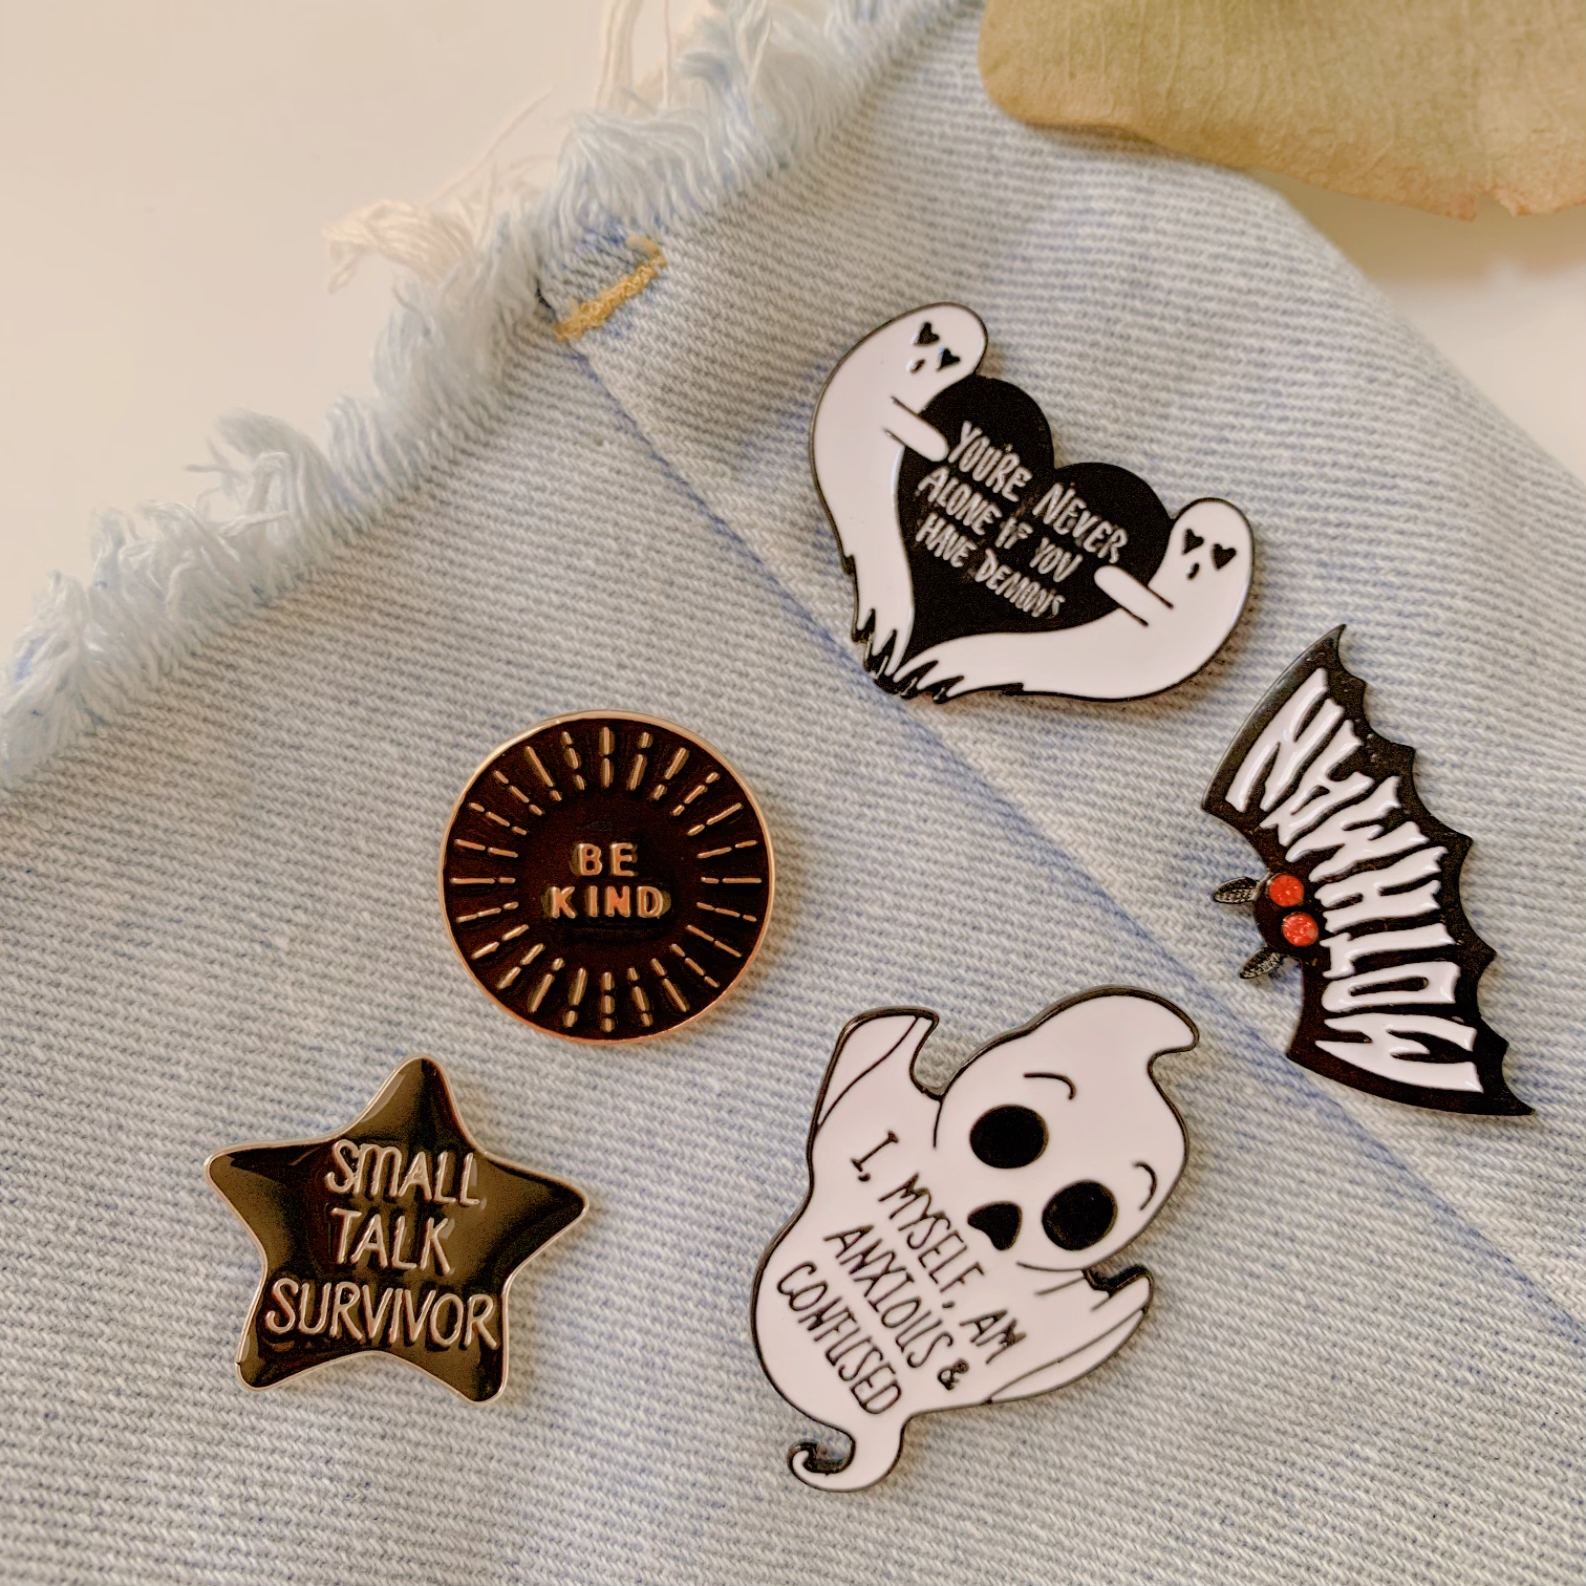 Pin on Patches I love